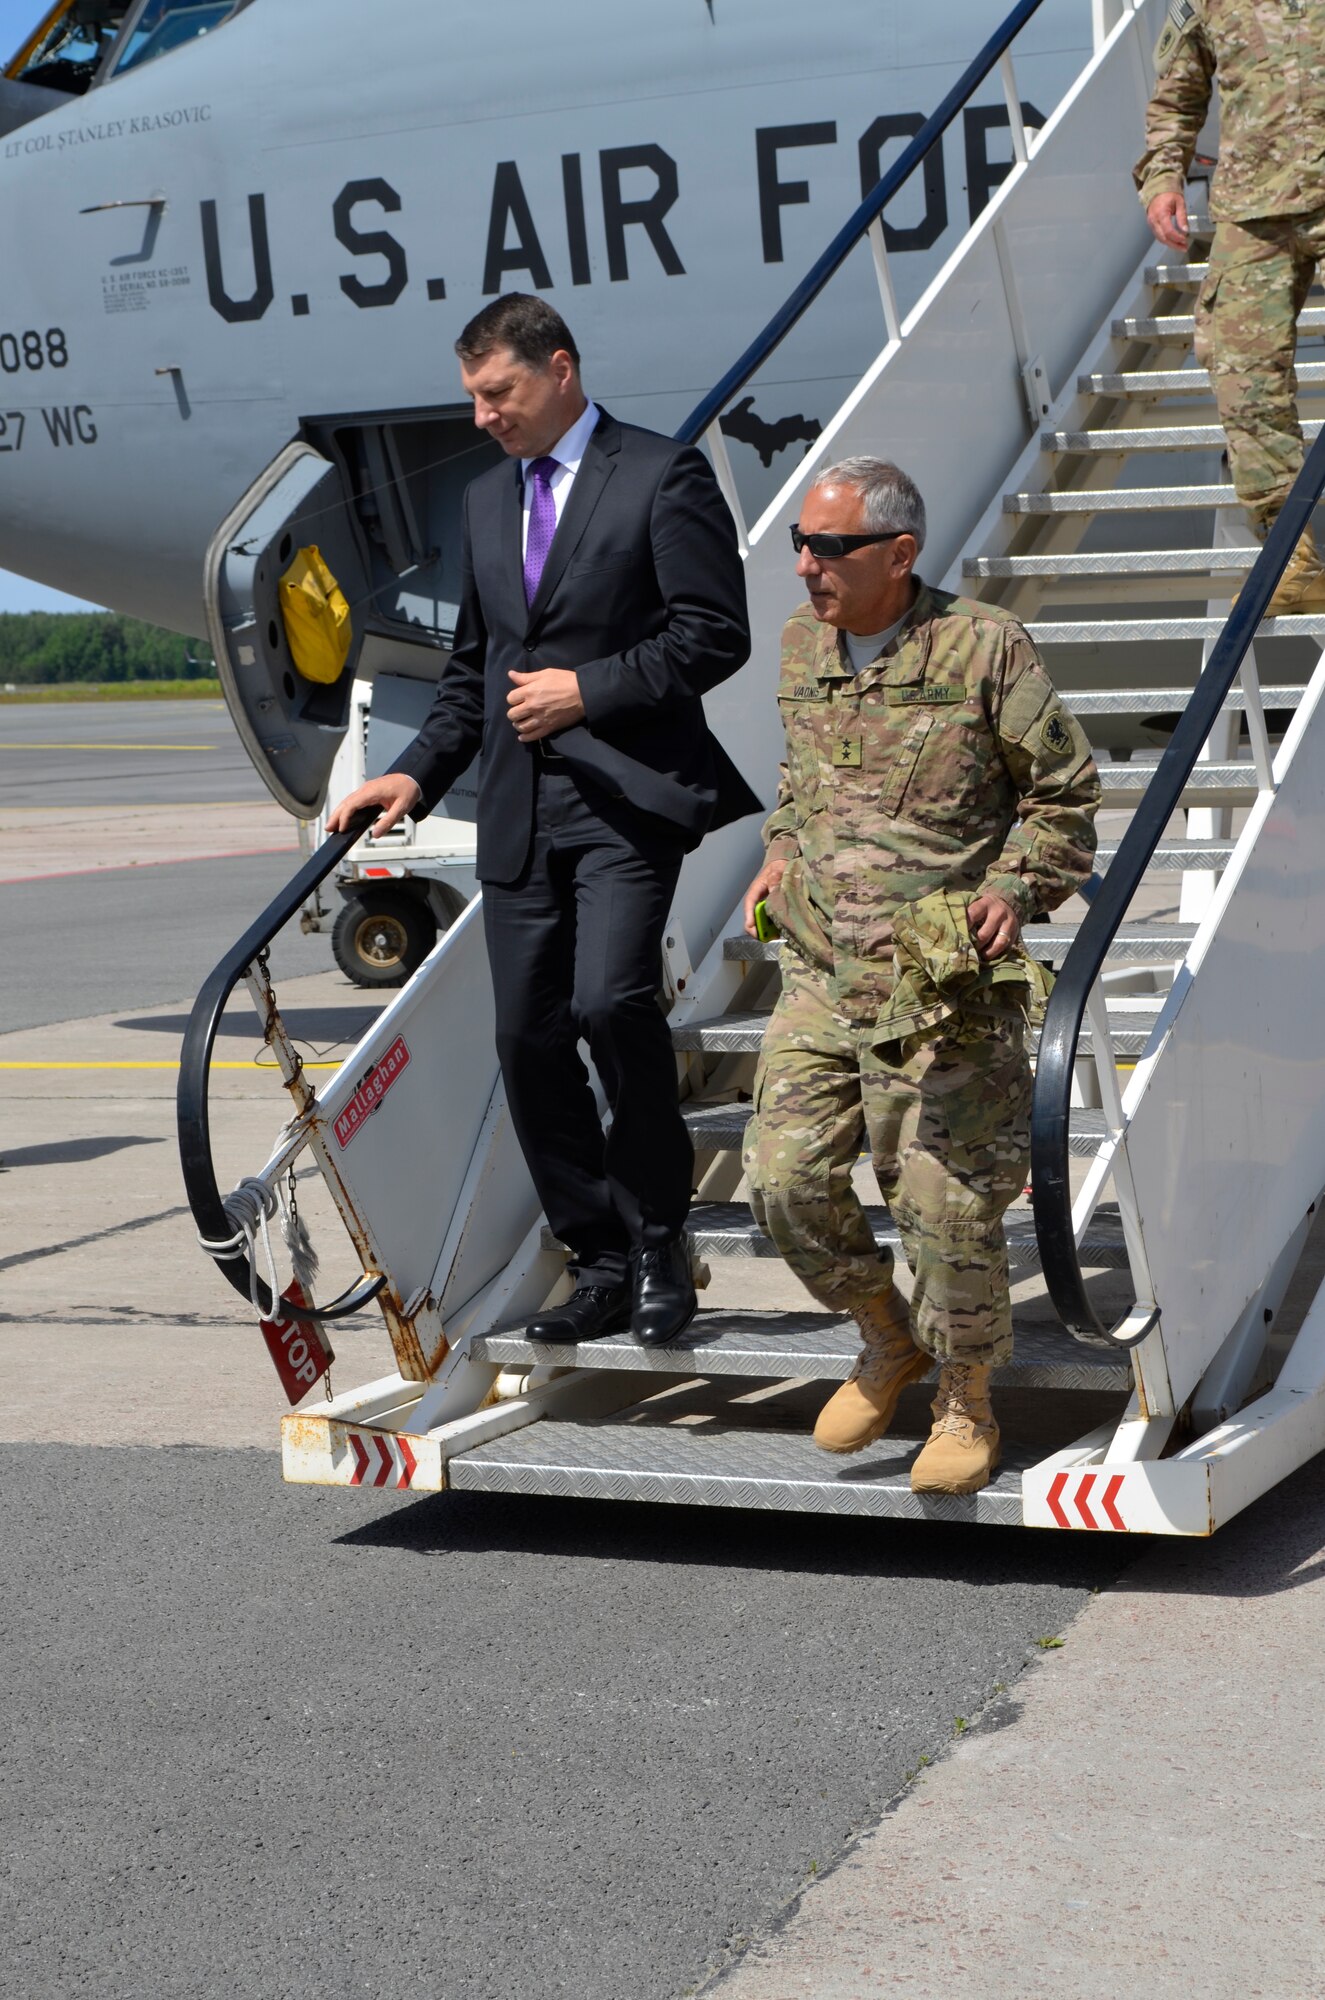 Maj. Gen. Gregory J. Vadnais, Adjutant General of the Michigan National Guard and newly elected Latvian President Raimods Veonis exit a 127th Wing, Michigan Air National Guard KC-135 Stratotanker after flight at the Riga International Airport, Latvia, during the Michigan and Latvian Partnership Day on June 10, 2015. The DOD sponsored State Partnership Program between Michigan and the Latvian government began in 1993 being one of the models for an ongoing program that has united 68 unique security partnerships involving 74 nations around the globe. Operation Saber Strike has brought 14 ally and partner nations together to increase interoperability between military forces. (U.S. Air National Guard photo by Capt. Anthony J. Lesterson)